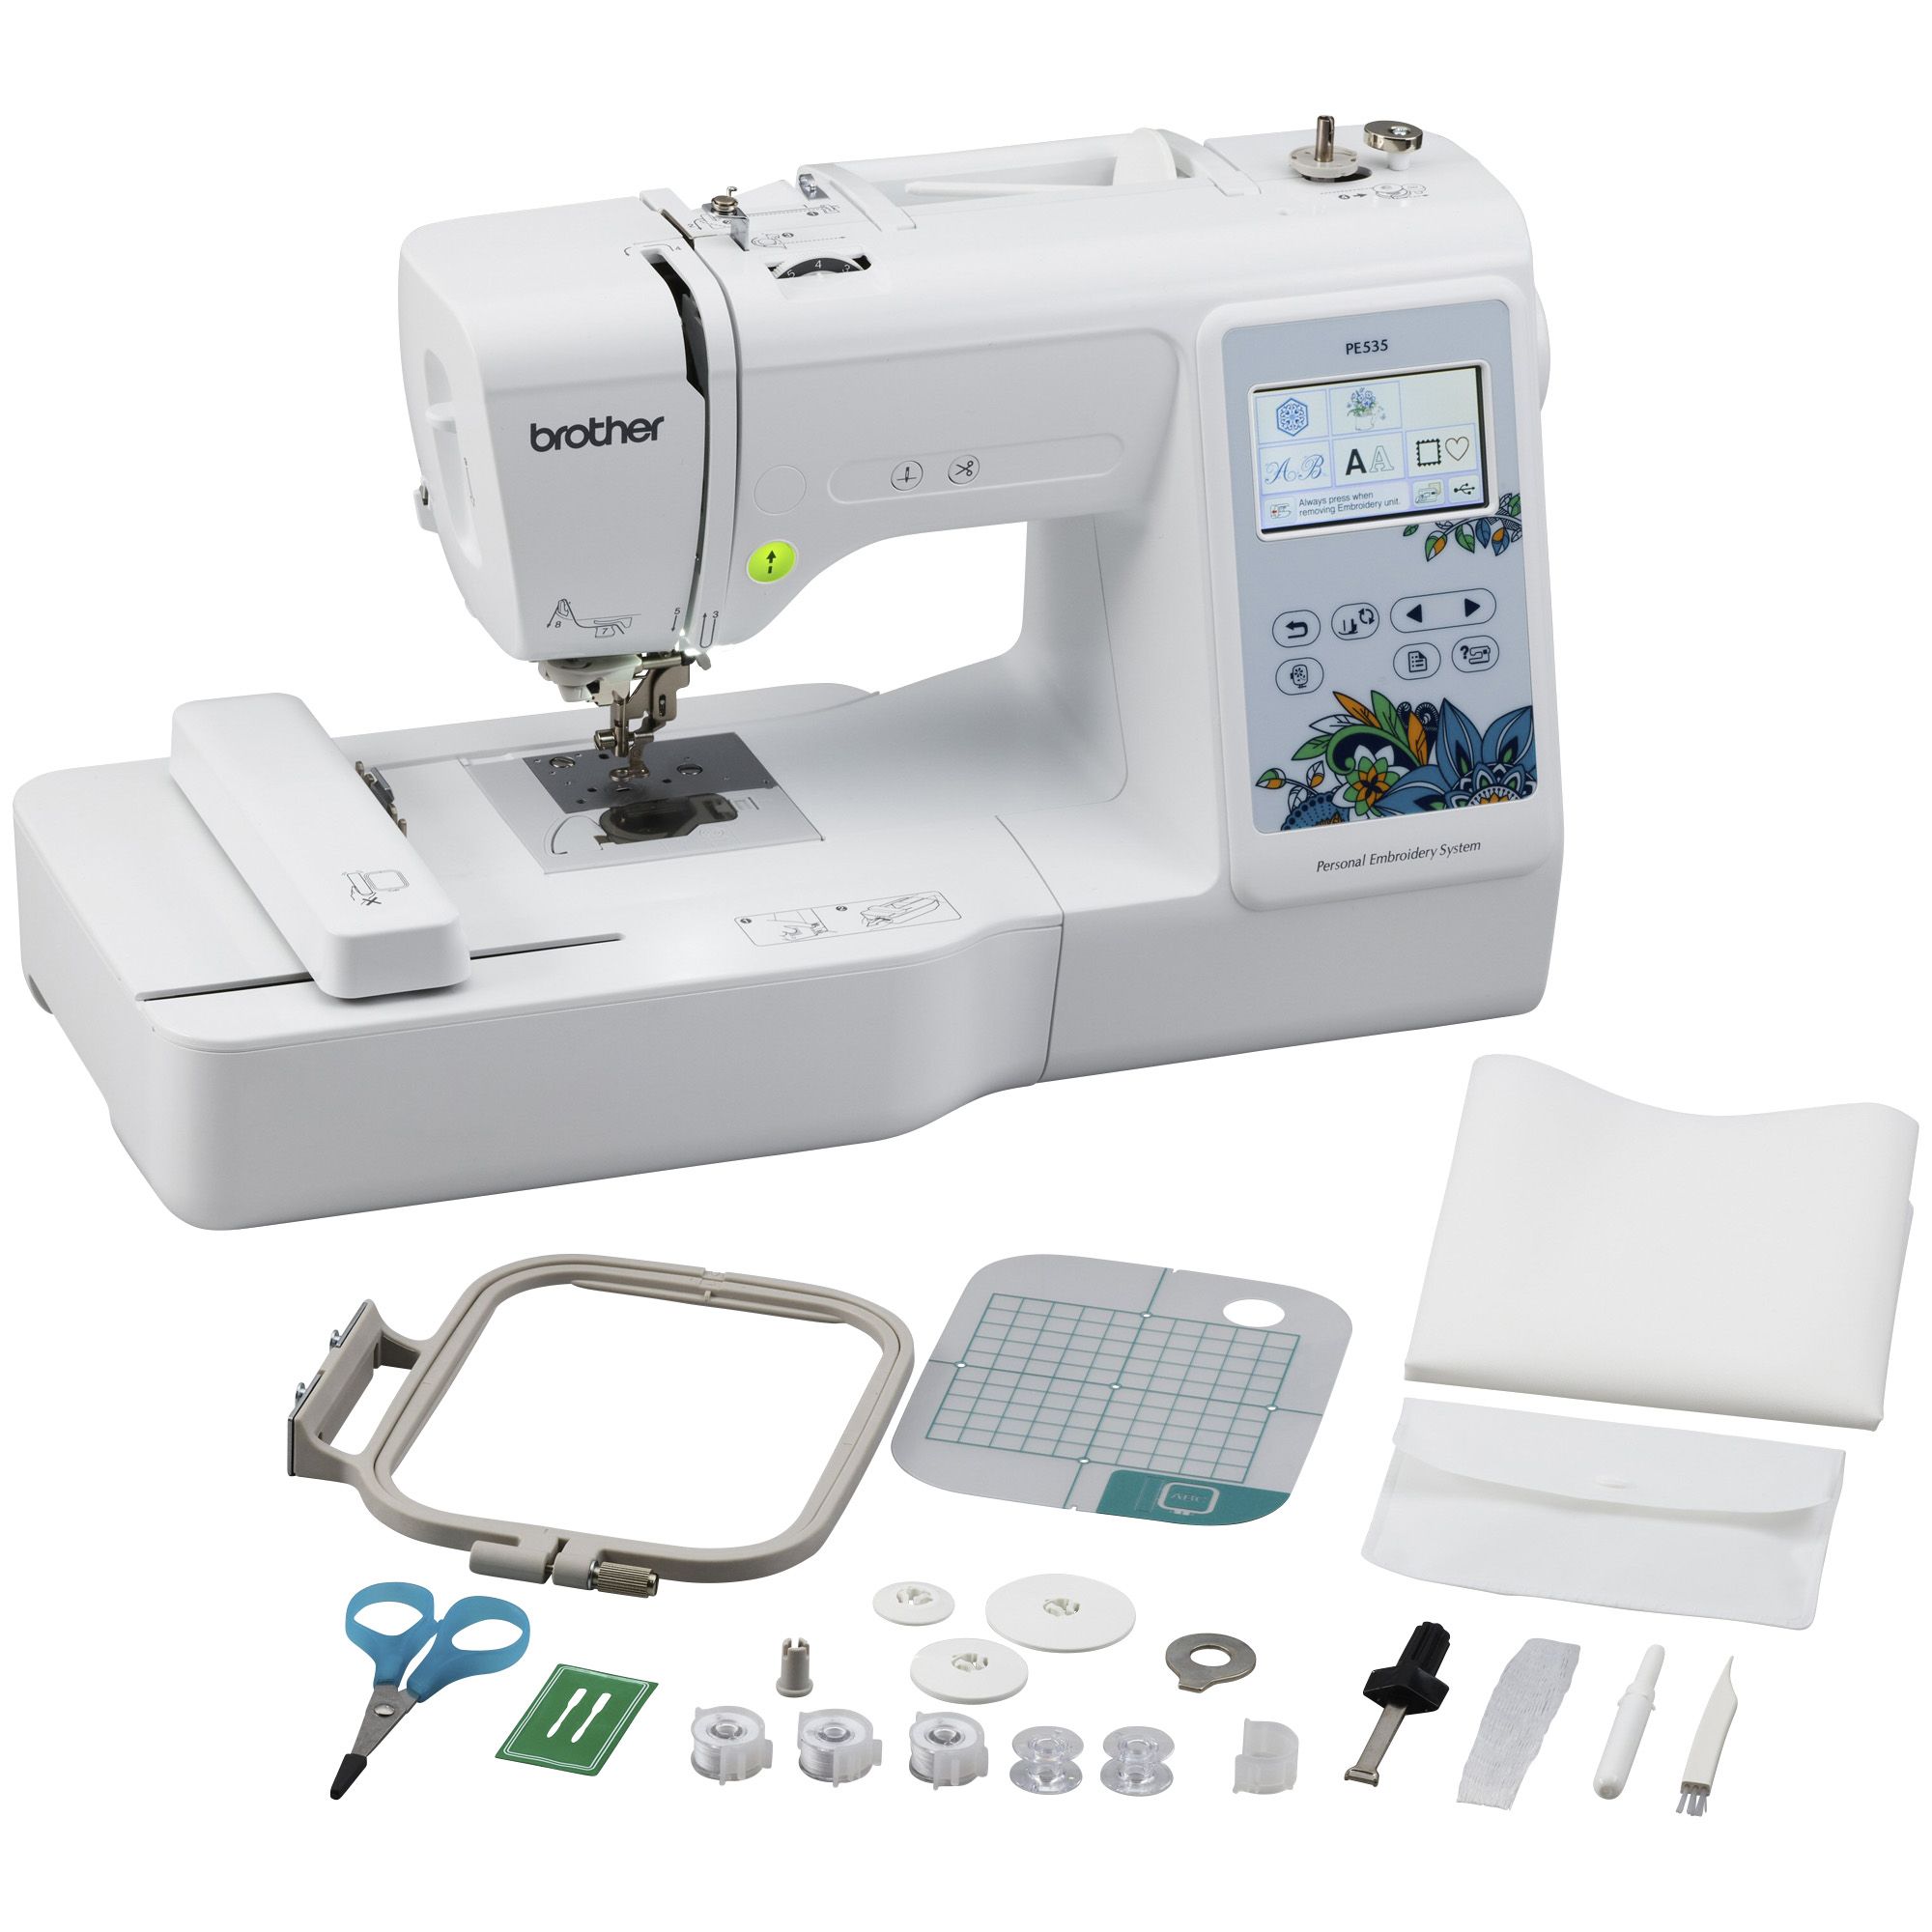 Brother Pe535 Embroidery Machine, 80 Built-in Designs, 4 X 4